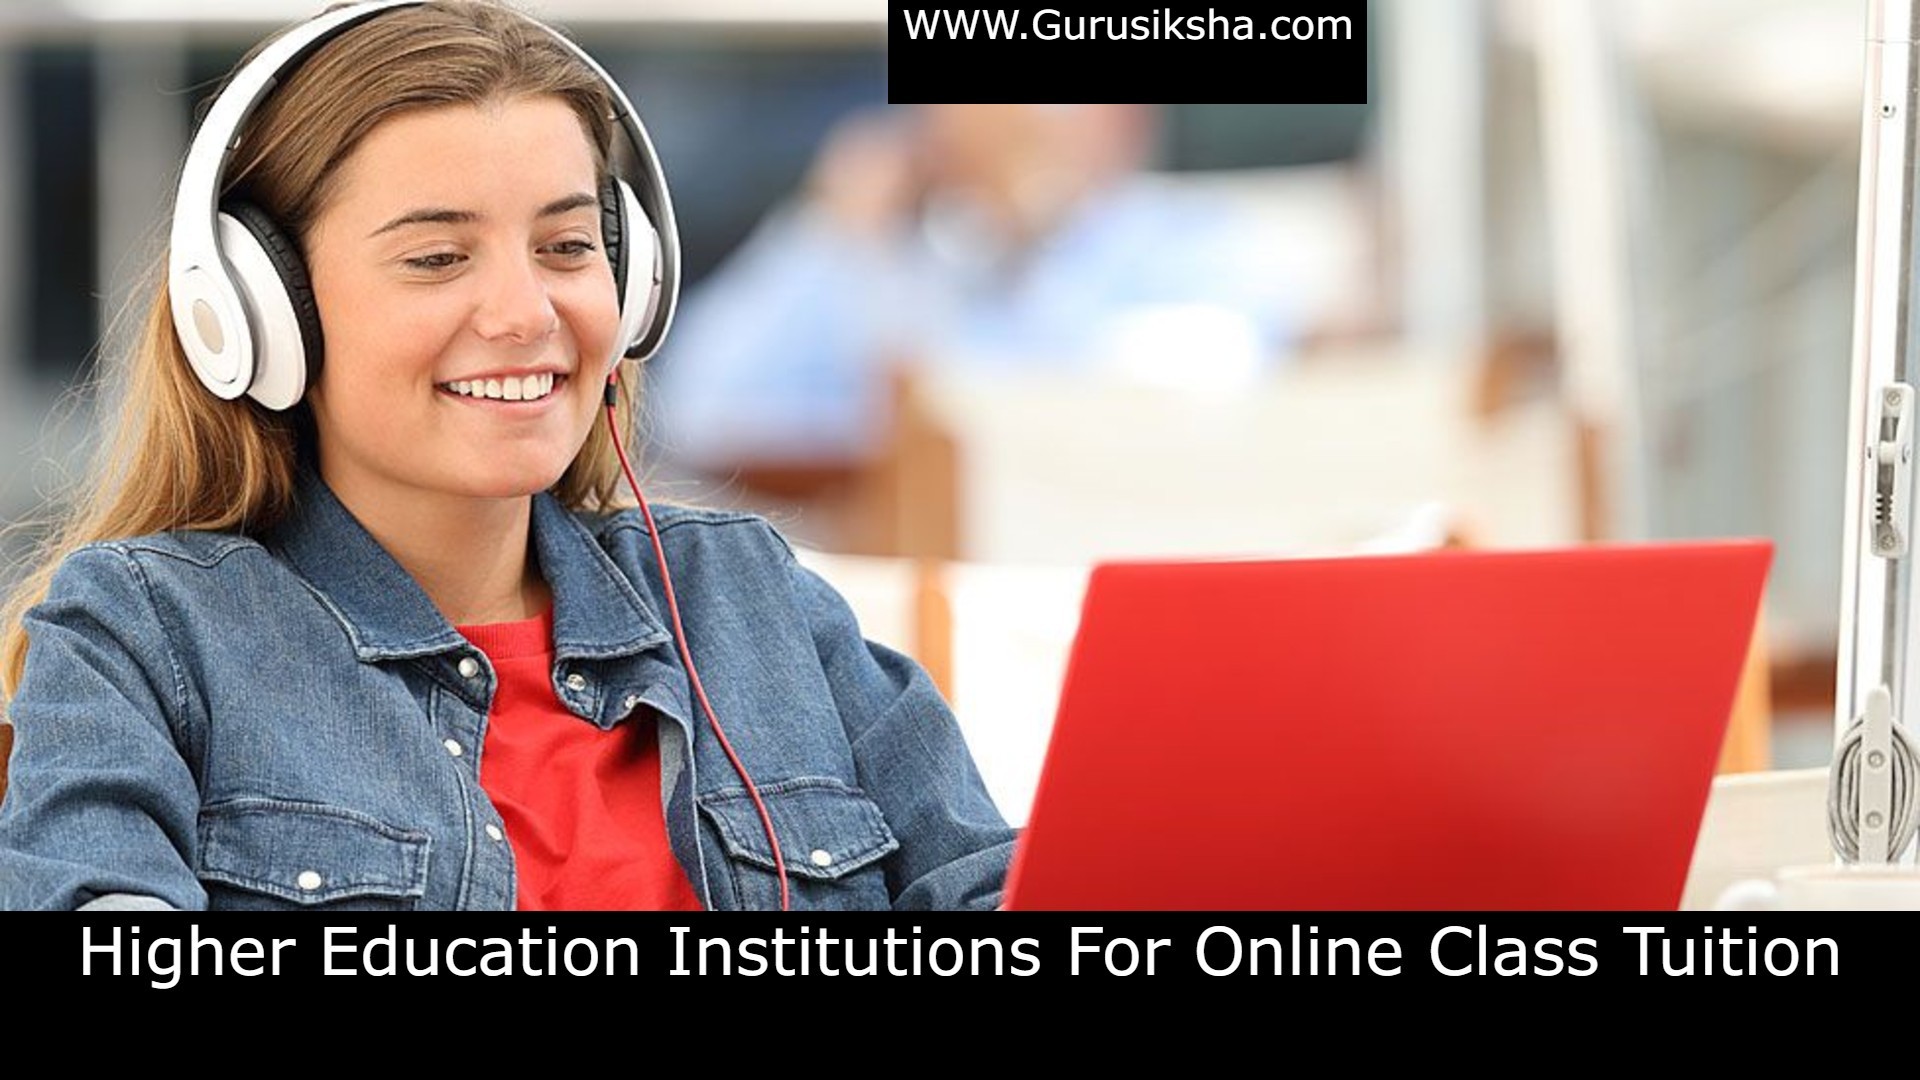 Higher Education Institutions For Online Class Tuition